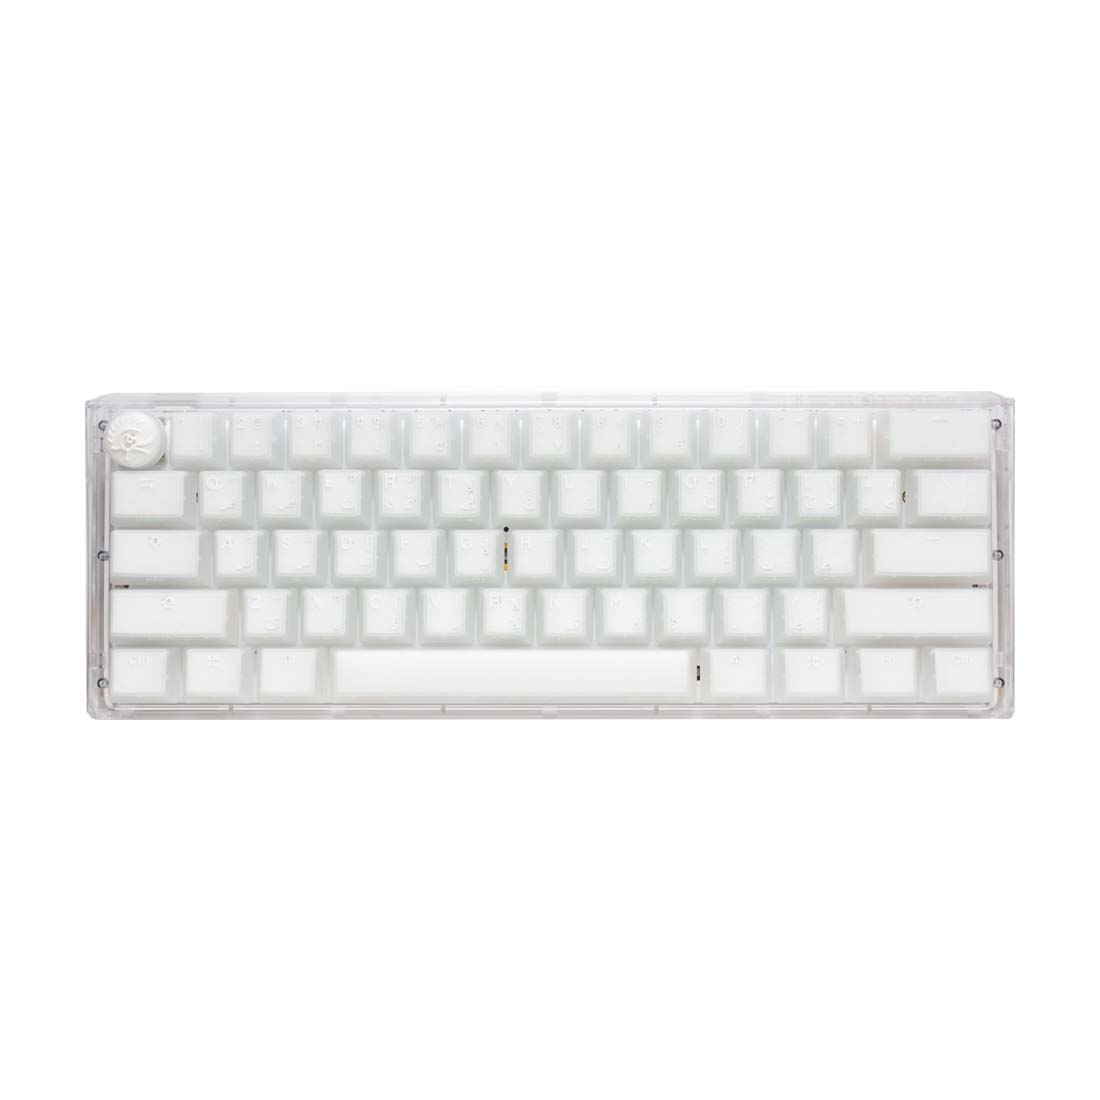 Ducky One 3 Mini Aura 60% Wired Mechanical Gaming Keyboard - Brown Switch - White - لوحة مفاتيح - Store 974 | ستور ٩٧٤